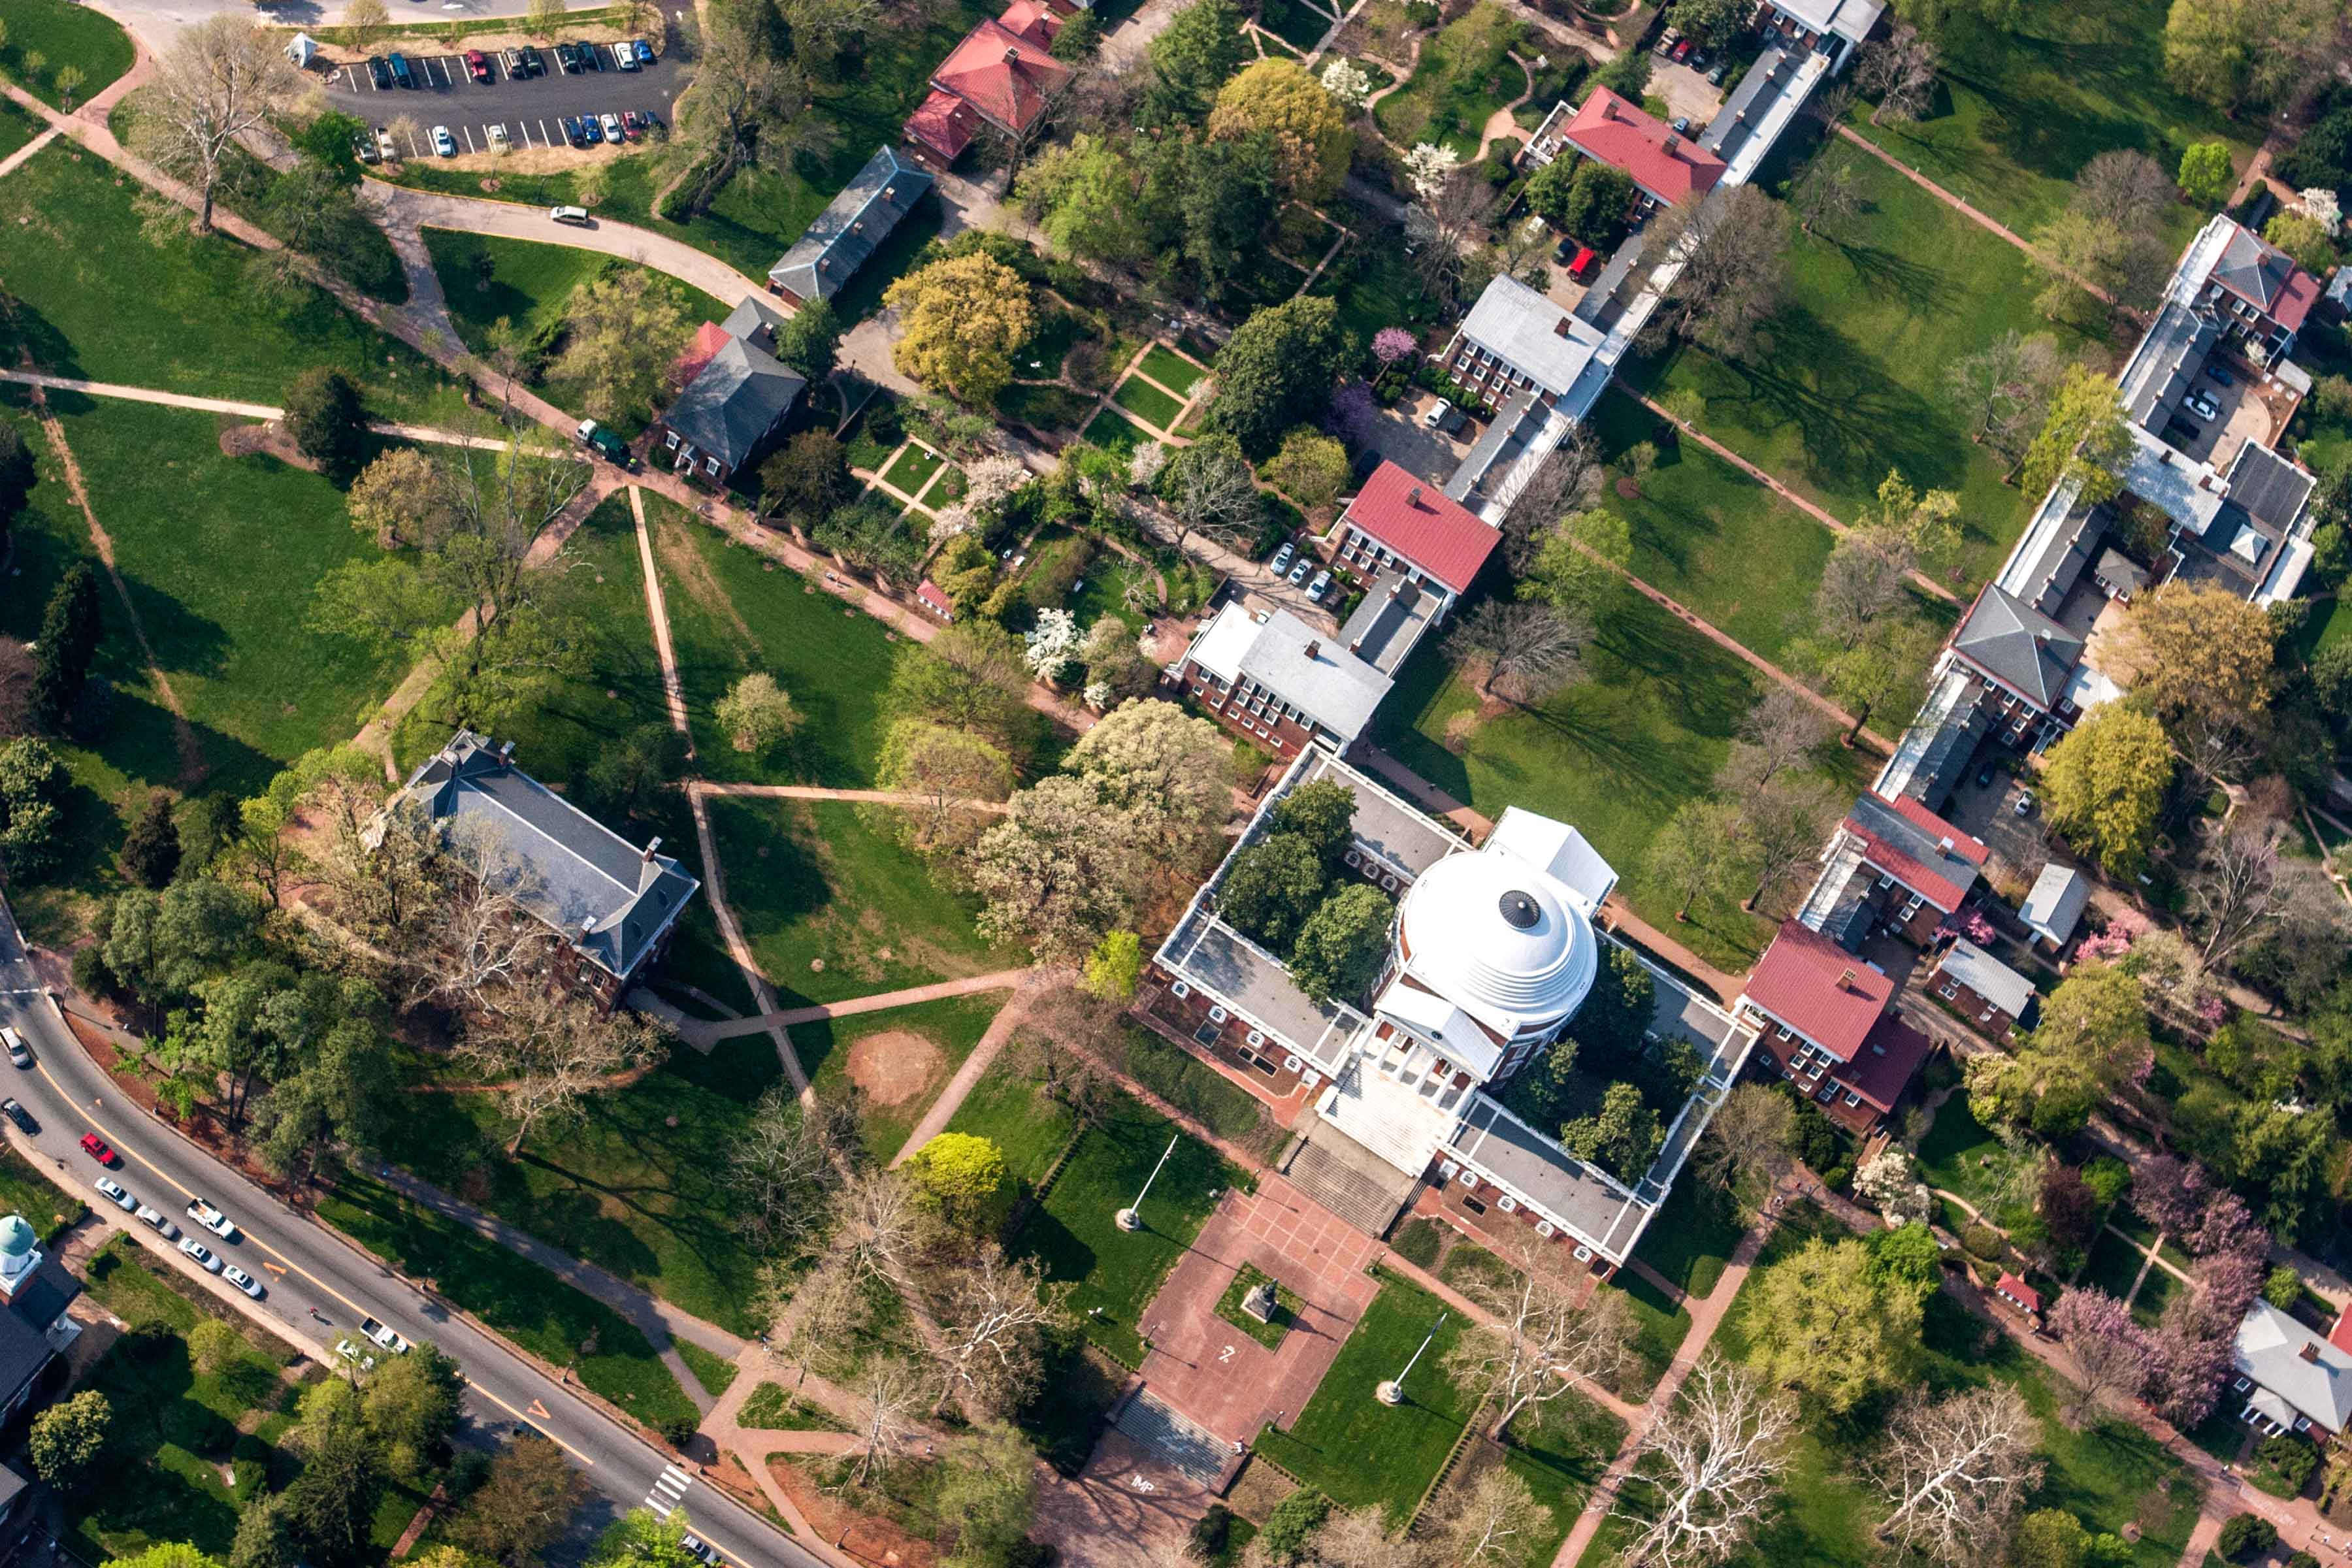 Aerial view of the Rotunda and the Lawn